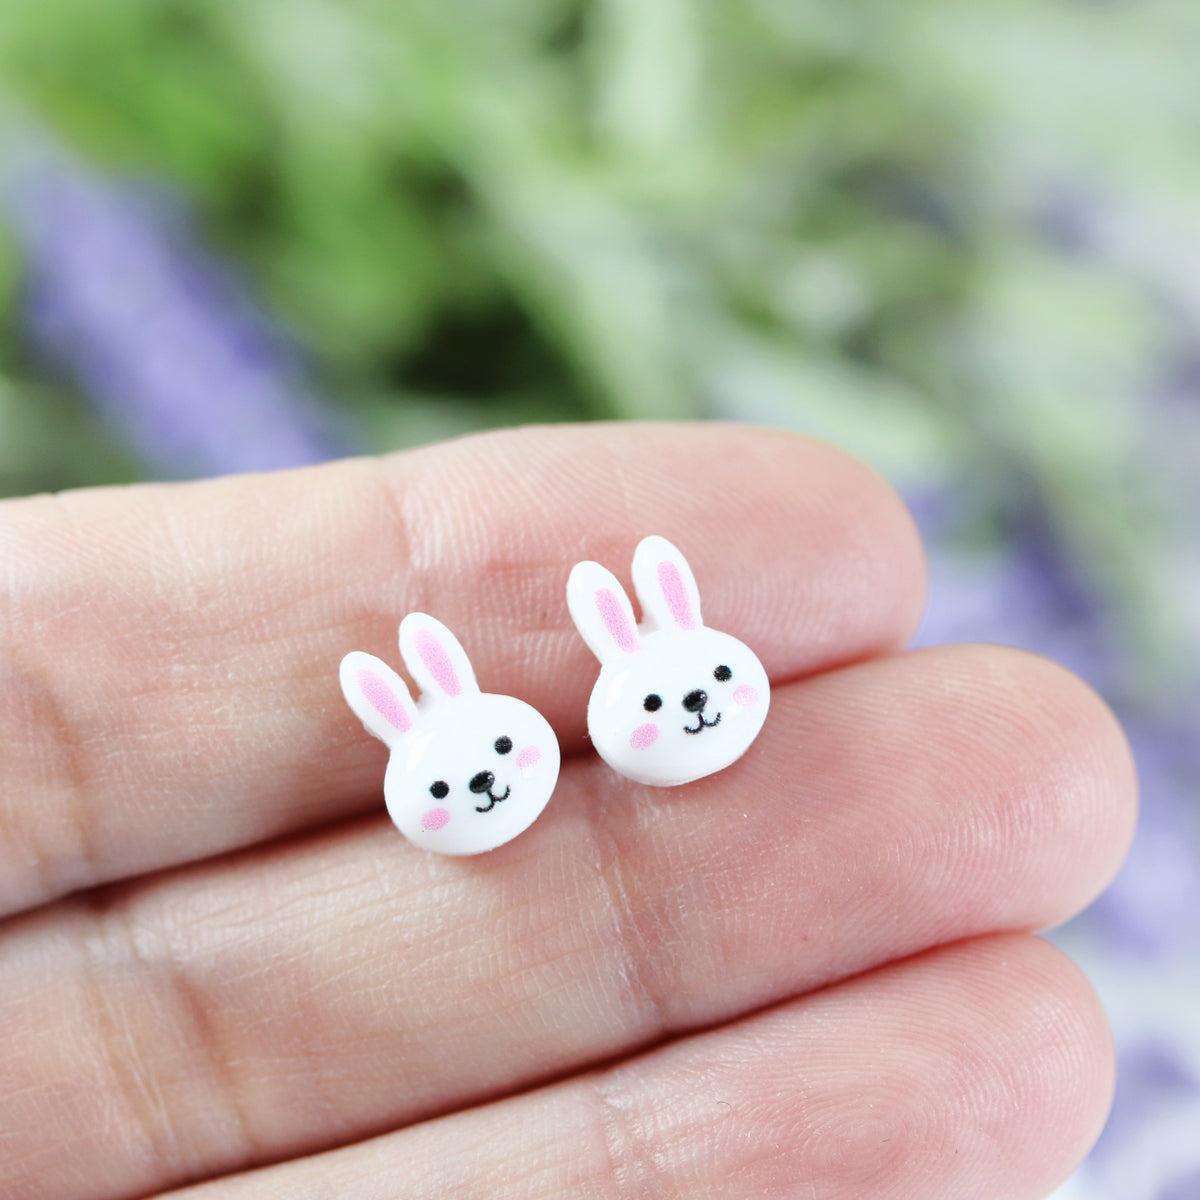 Plastic Post or Invisible Clip On Metal Free Bunny Earrings 12mm – Pretty  Smart